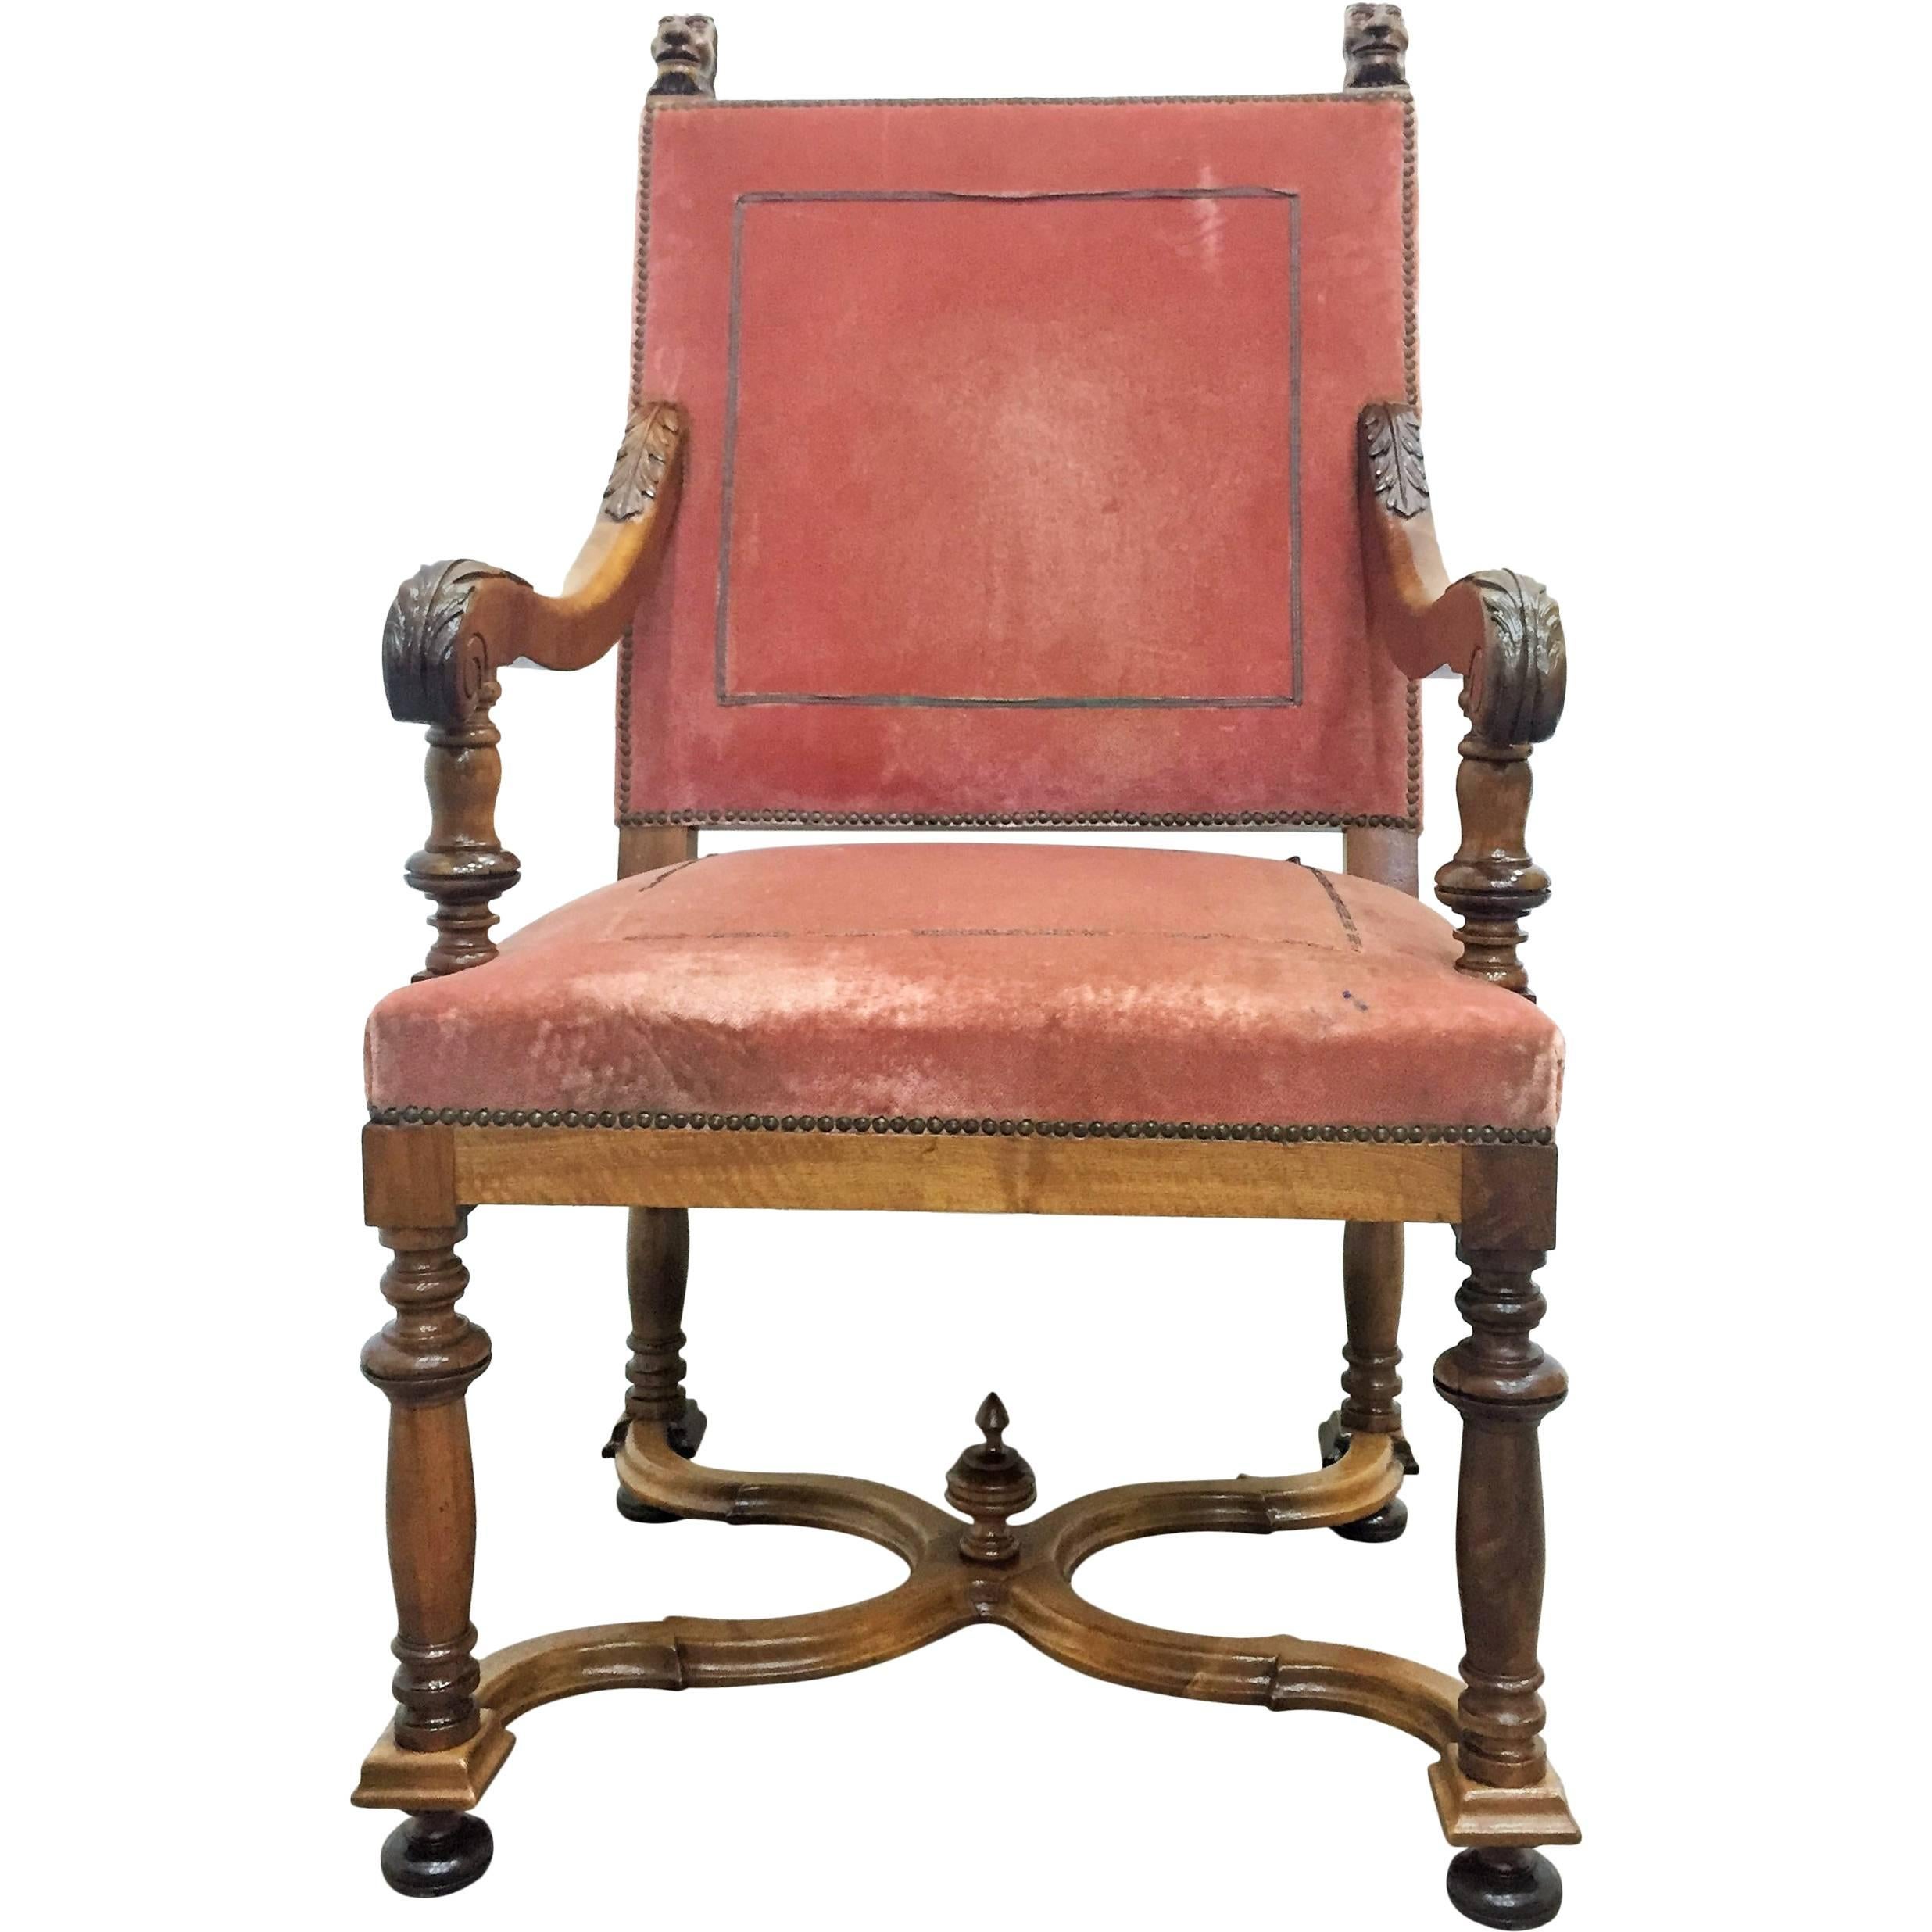 19th Century French Louis XIII Style Armchair